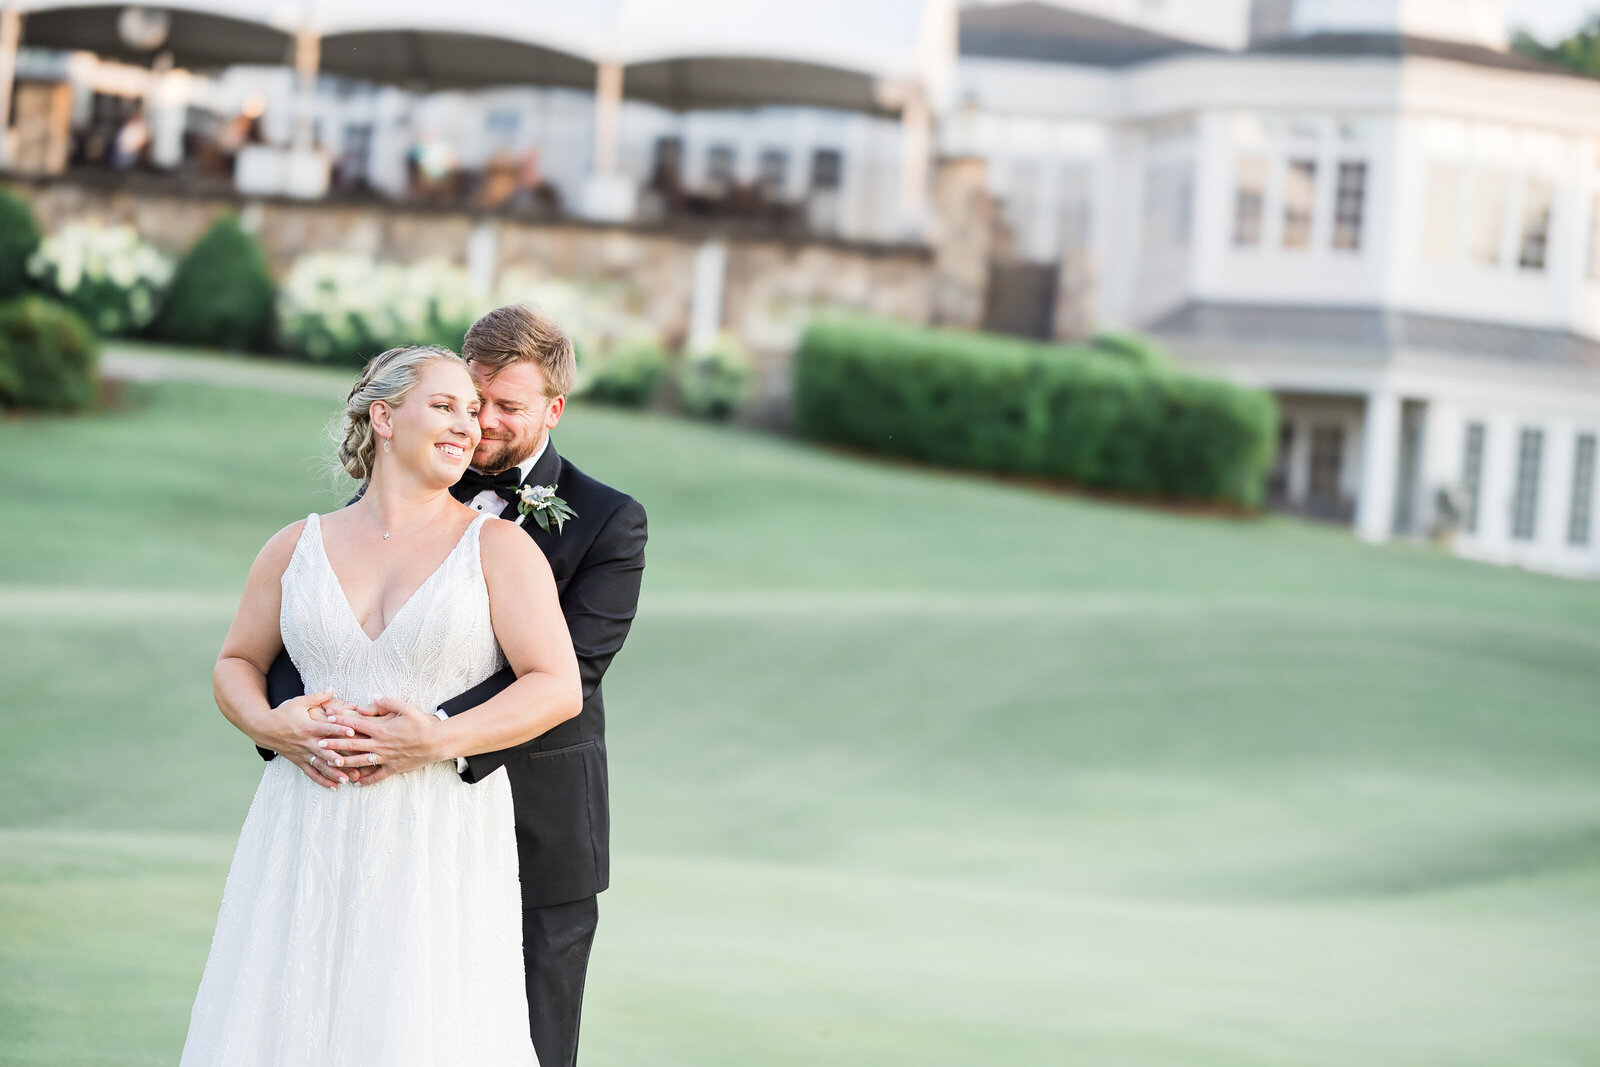 A wedding ceremony featuring a bride and groom at Druid Hill Golf Club captured by Gary Lun Photography